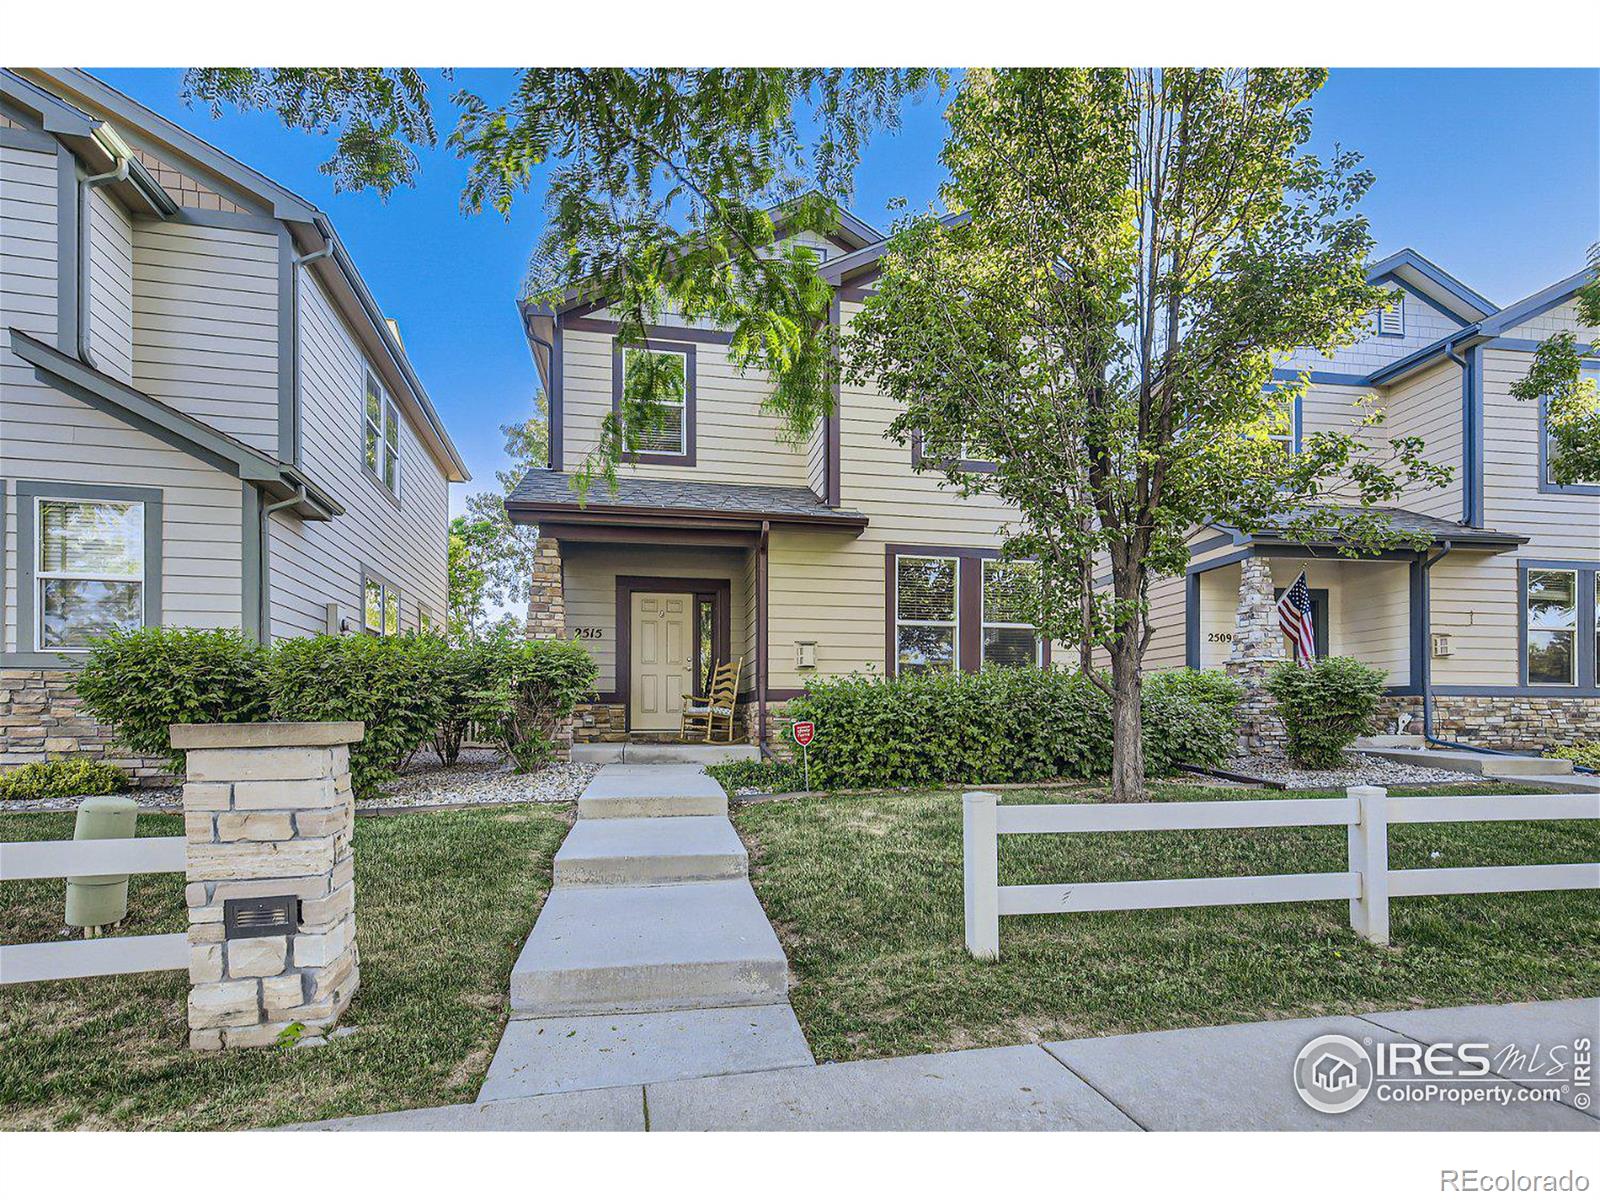 2515  Custer Drive, fort collins MLS: 4567891011413 Beds: 3 Baths: 3 Price: $485,000